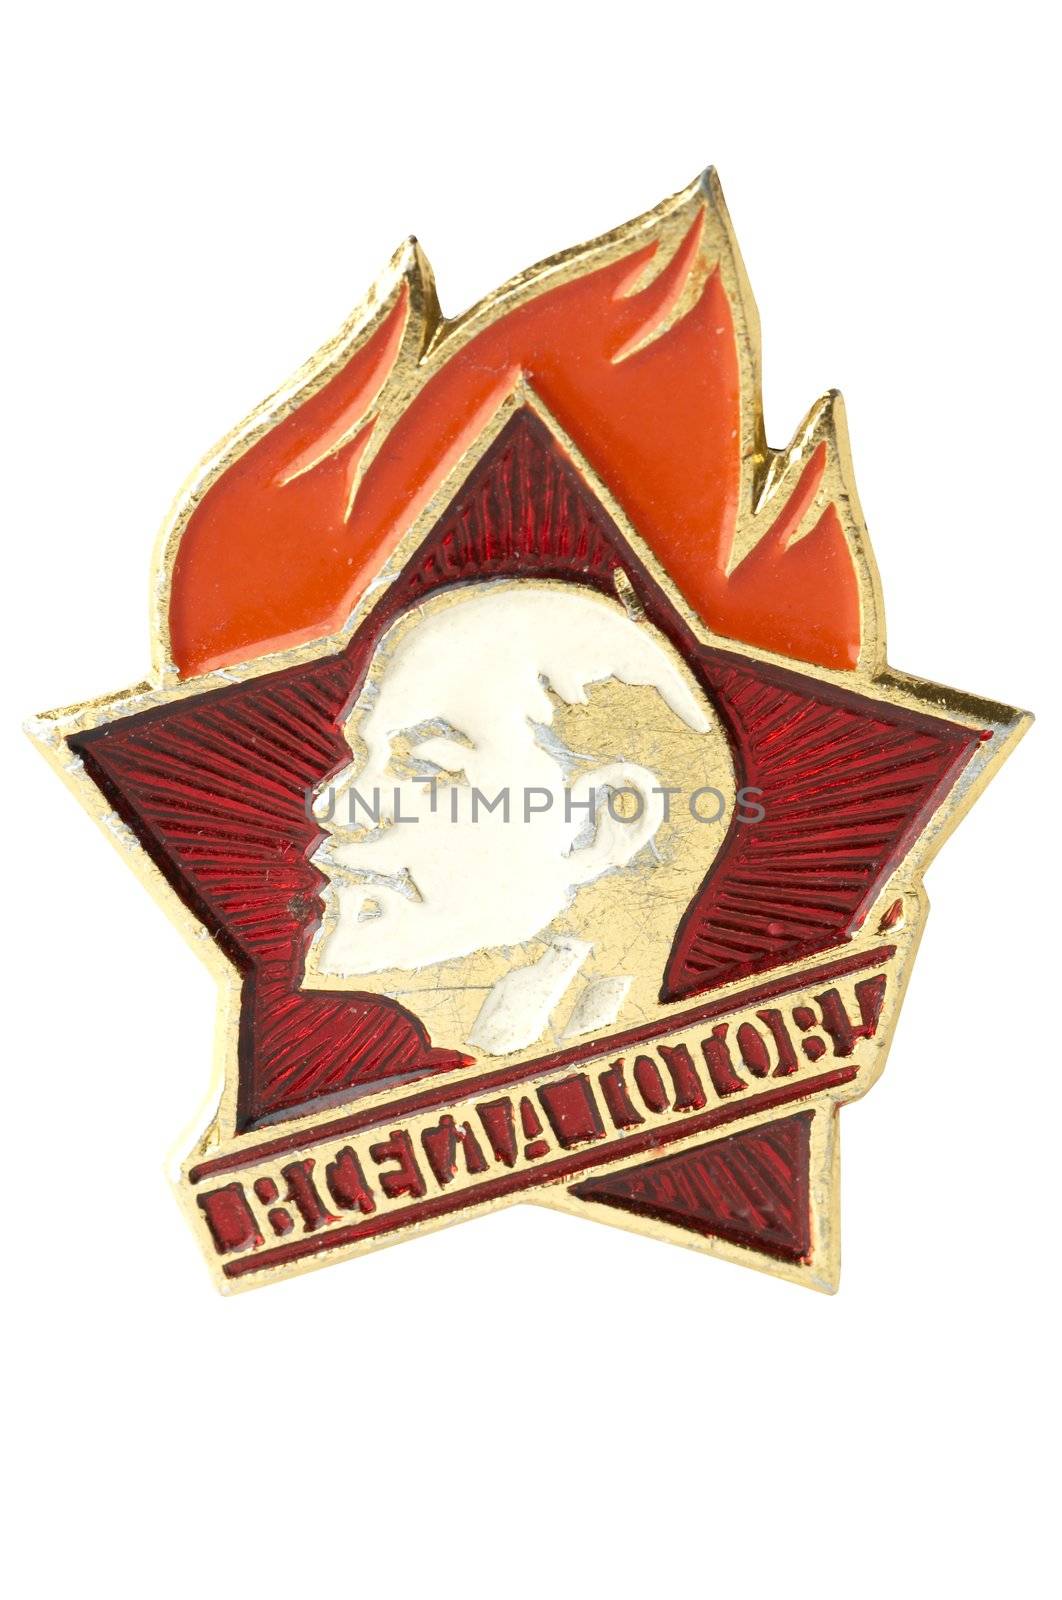 old pioneer badge in USSR isolated